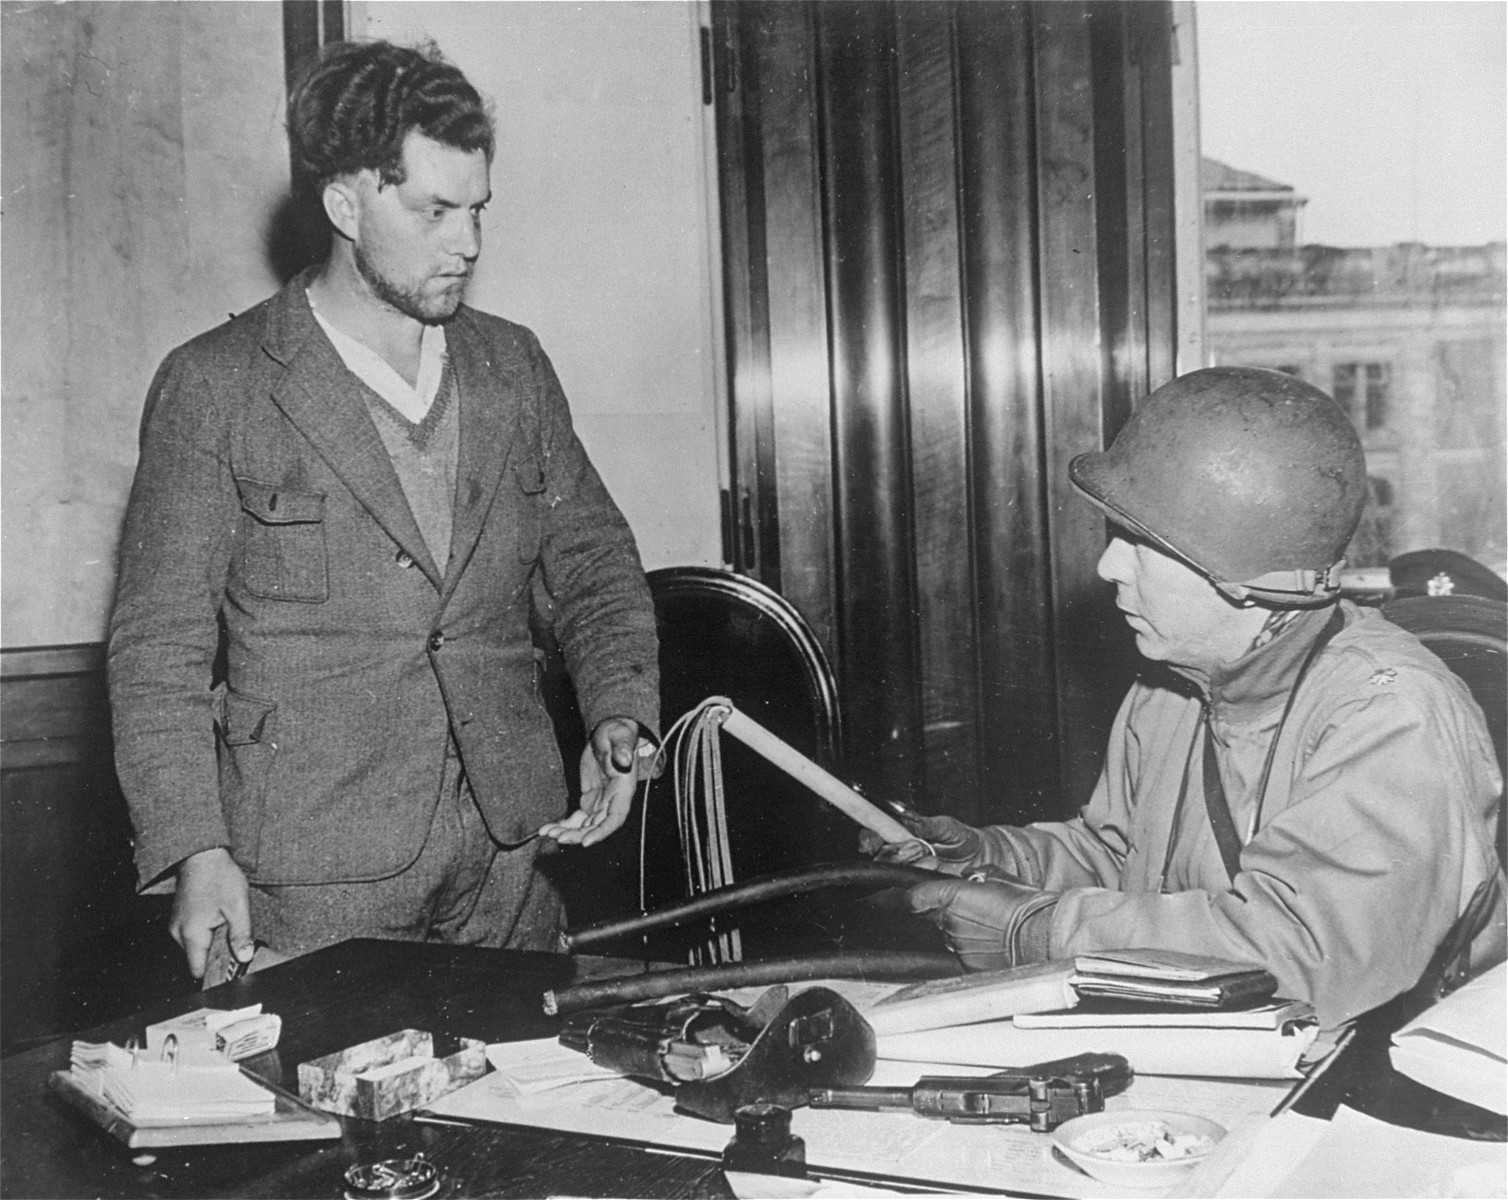 Major J.W. Bost of the 35th Infantry Division, Ninth U.S. Army, interrogates Lieutenant Herman Meyer (left), who was a Nazi storm trooper at the Lahde concentration camp near Hanover, Germany.  Bost is holding a leather thong whip which Meyer said he used only to "beat rugs."  Liberated prisoners claimed he used it to whip the prisoners.